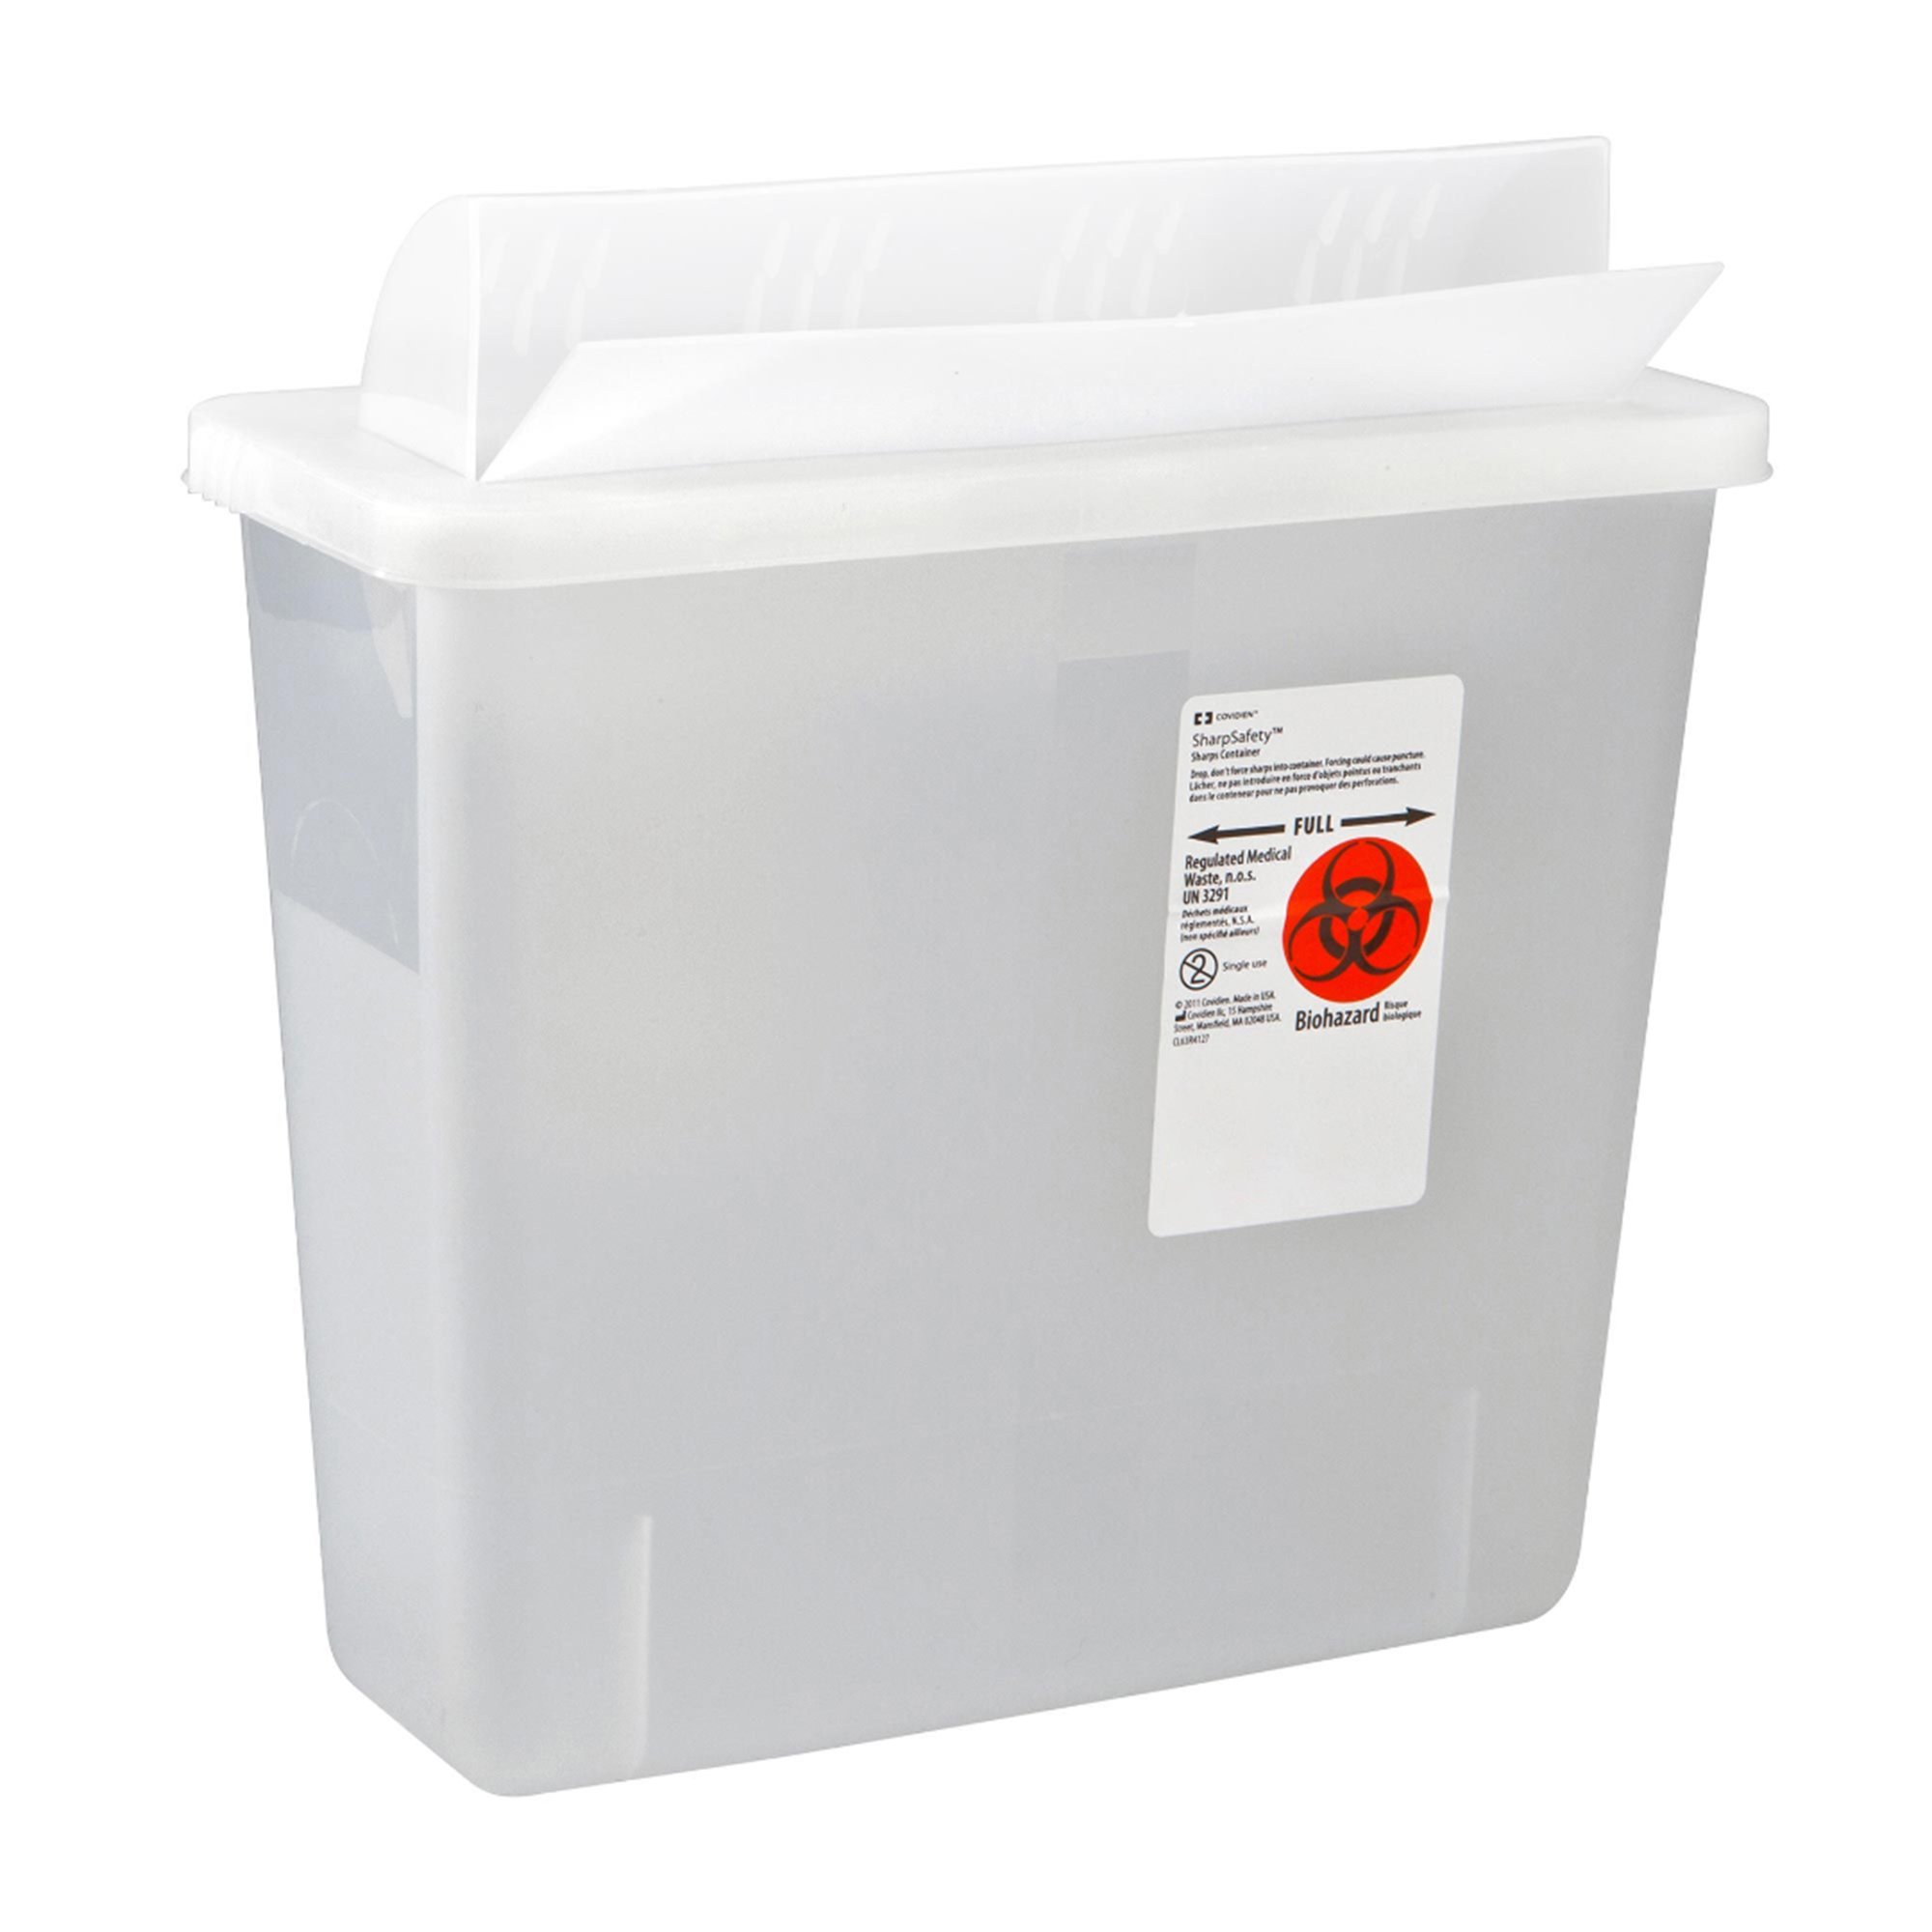 SHARPS CONTAINER 3GAL IN-ROOM